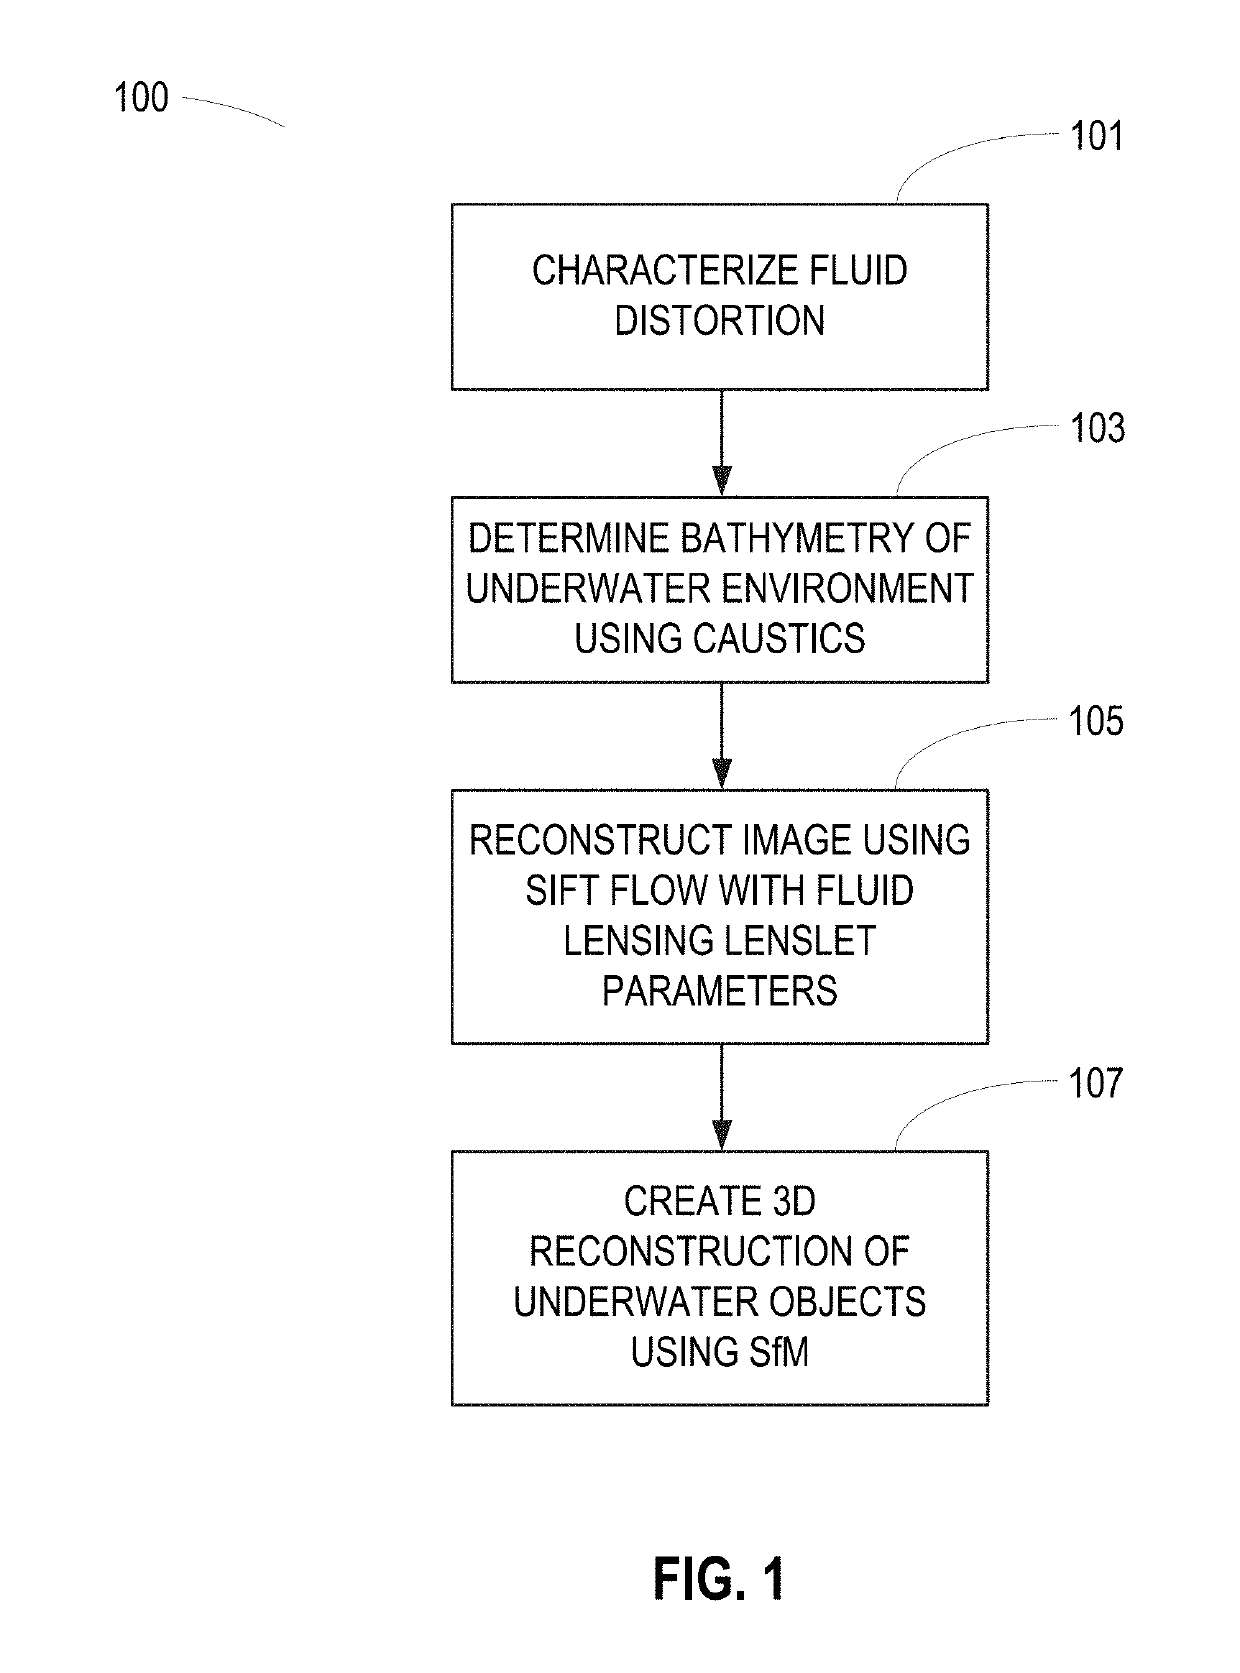 System and method for imaging underwater environments using fluid lensing